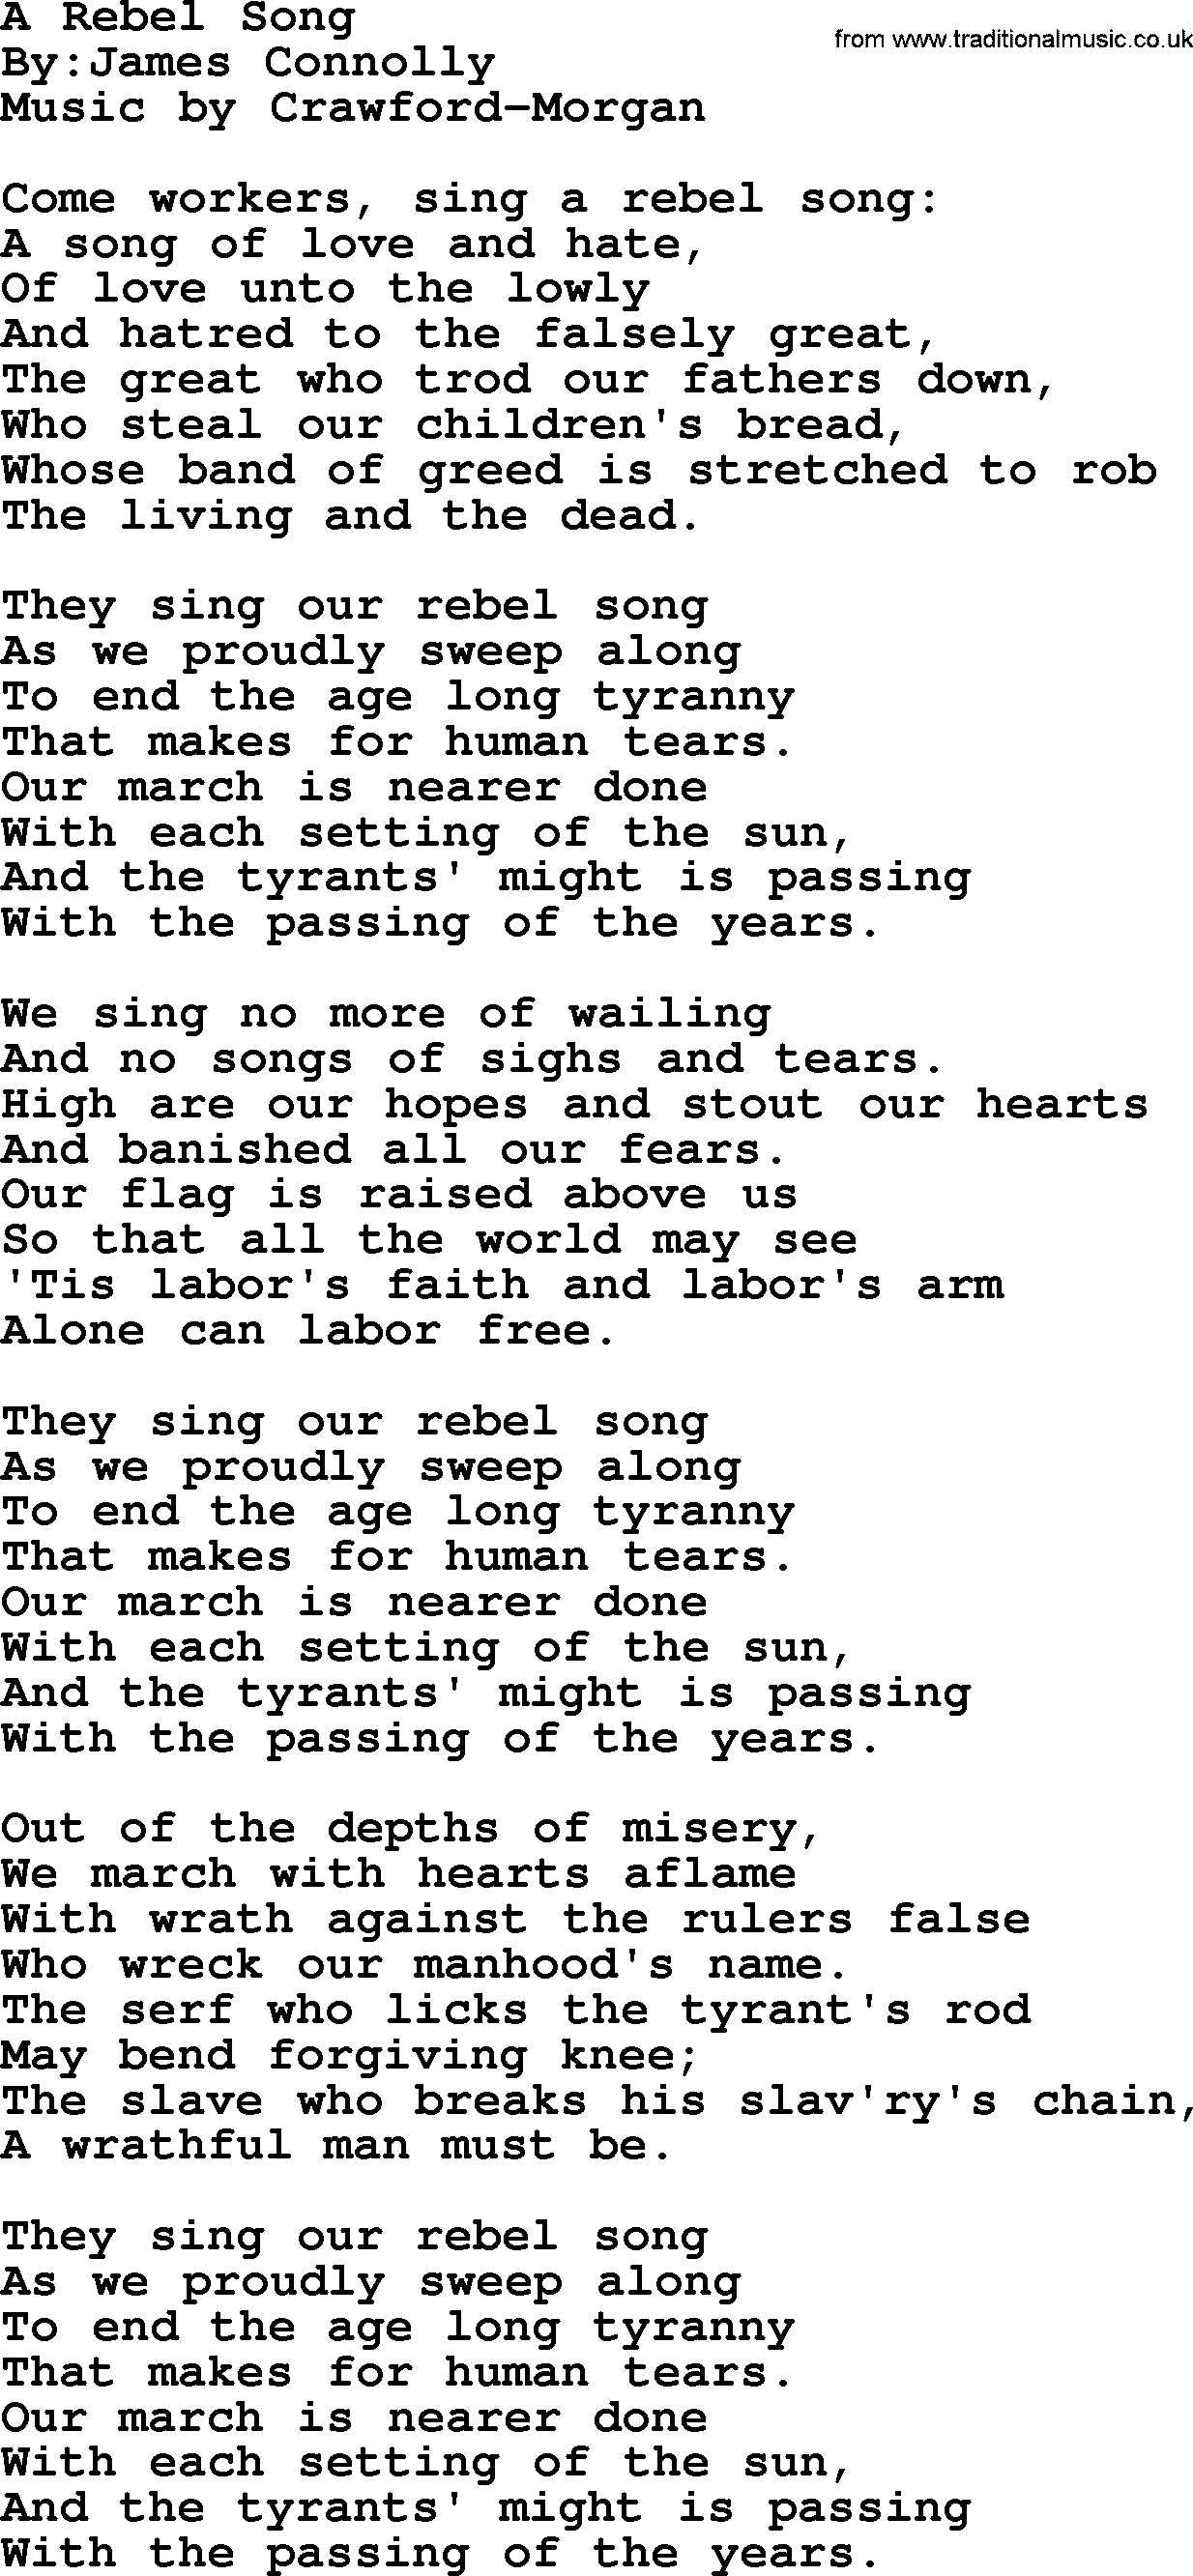 Political, Solidarity, Workers or Union song: A Rebel Song, lyrics